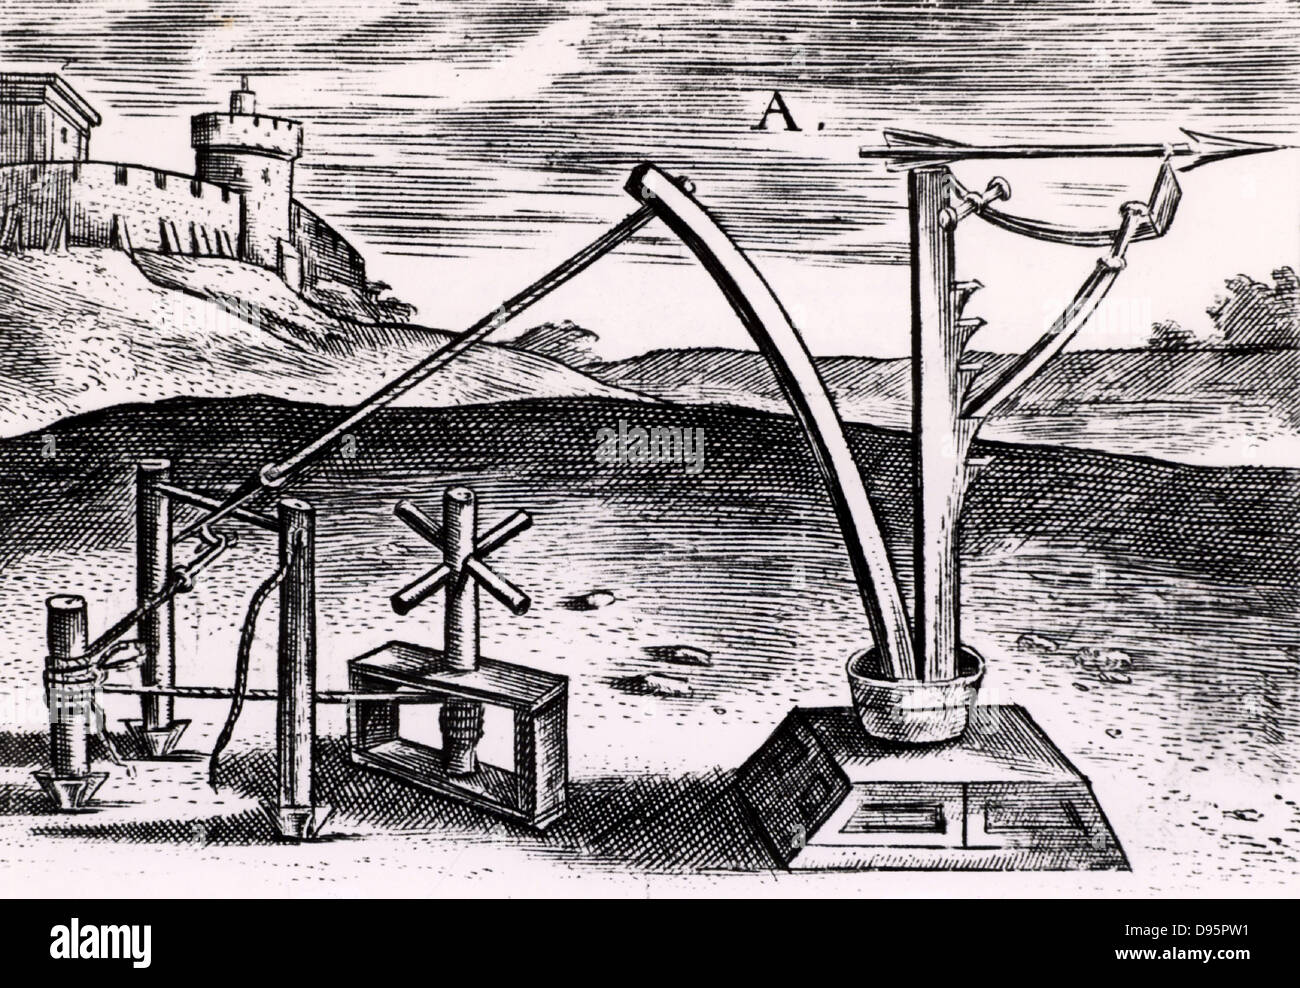 Reconstruction of a Roman machine for shooting arrows wound up ready for the missile to be released. From 'Poliorceticon sive de machinis tormentis telis' by Justus Lipsius (Joost Lips) (Antwerp, 1605). Engraving. Stock Photo